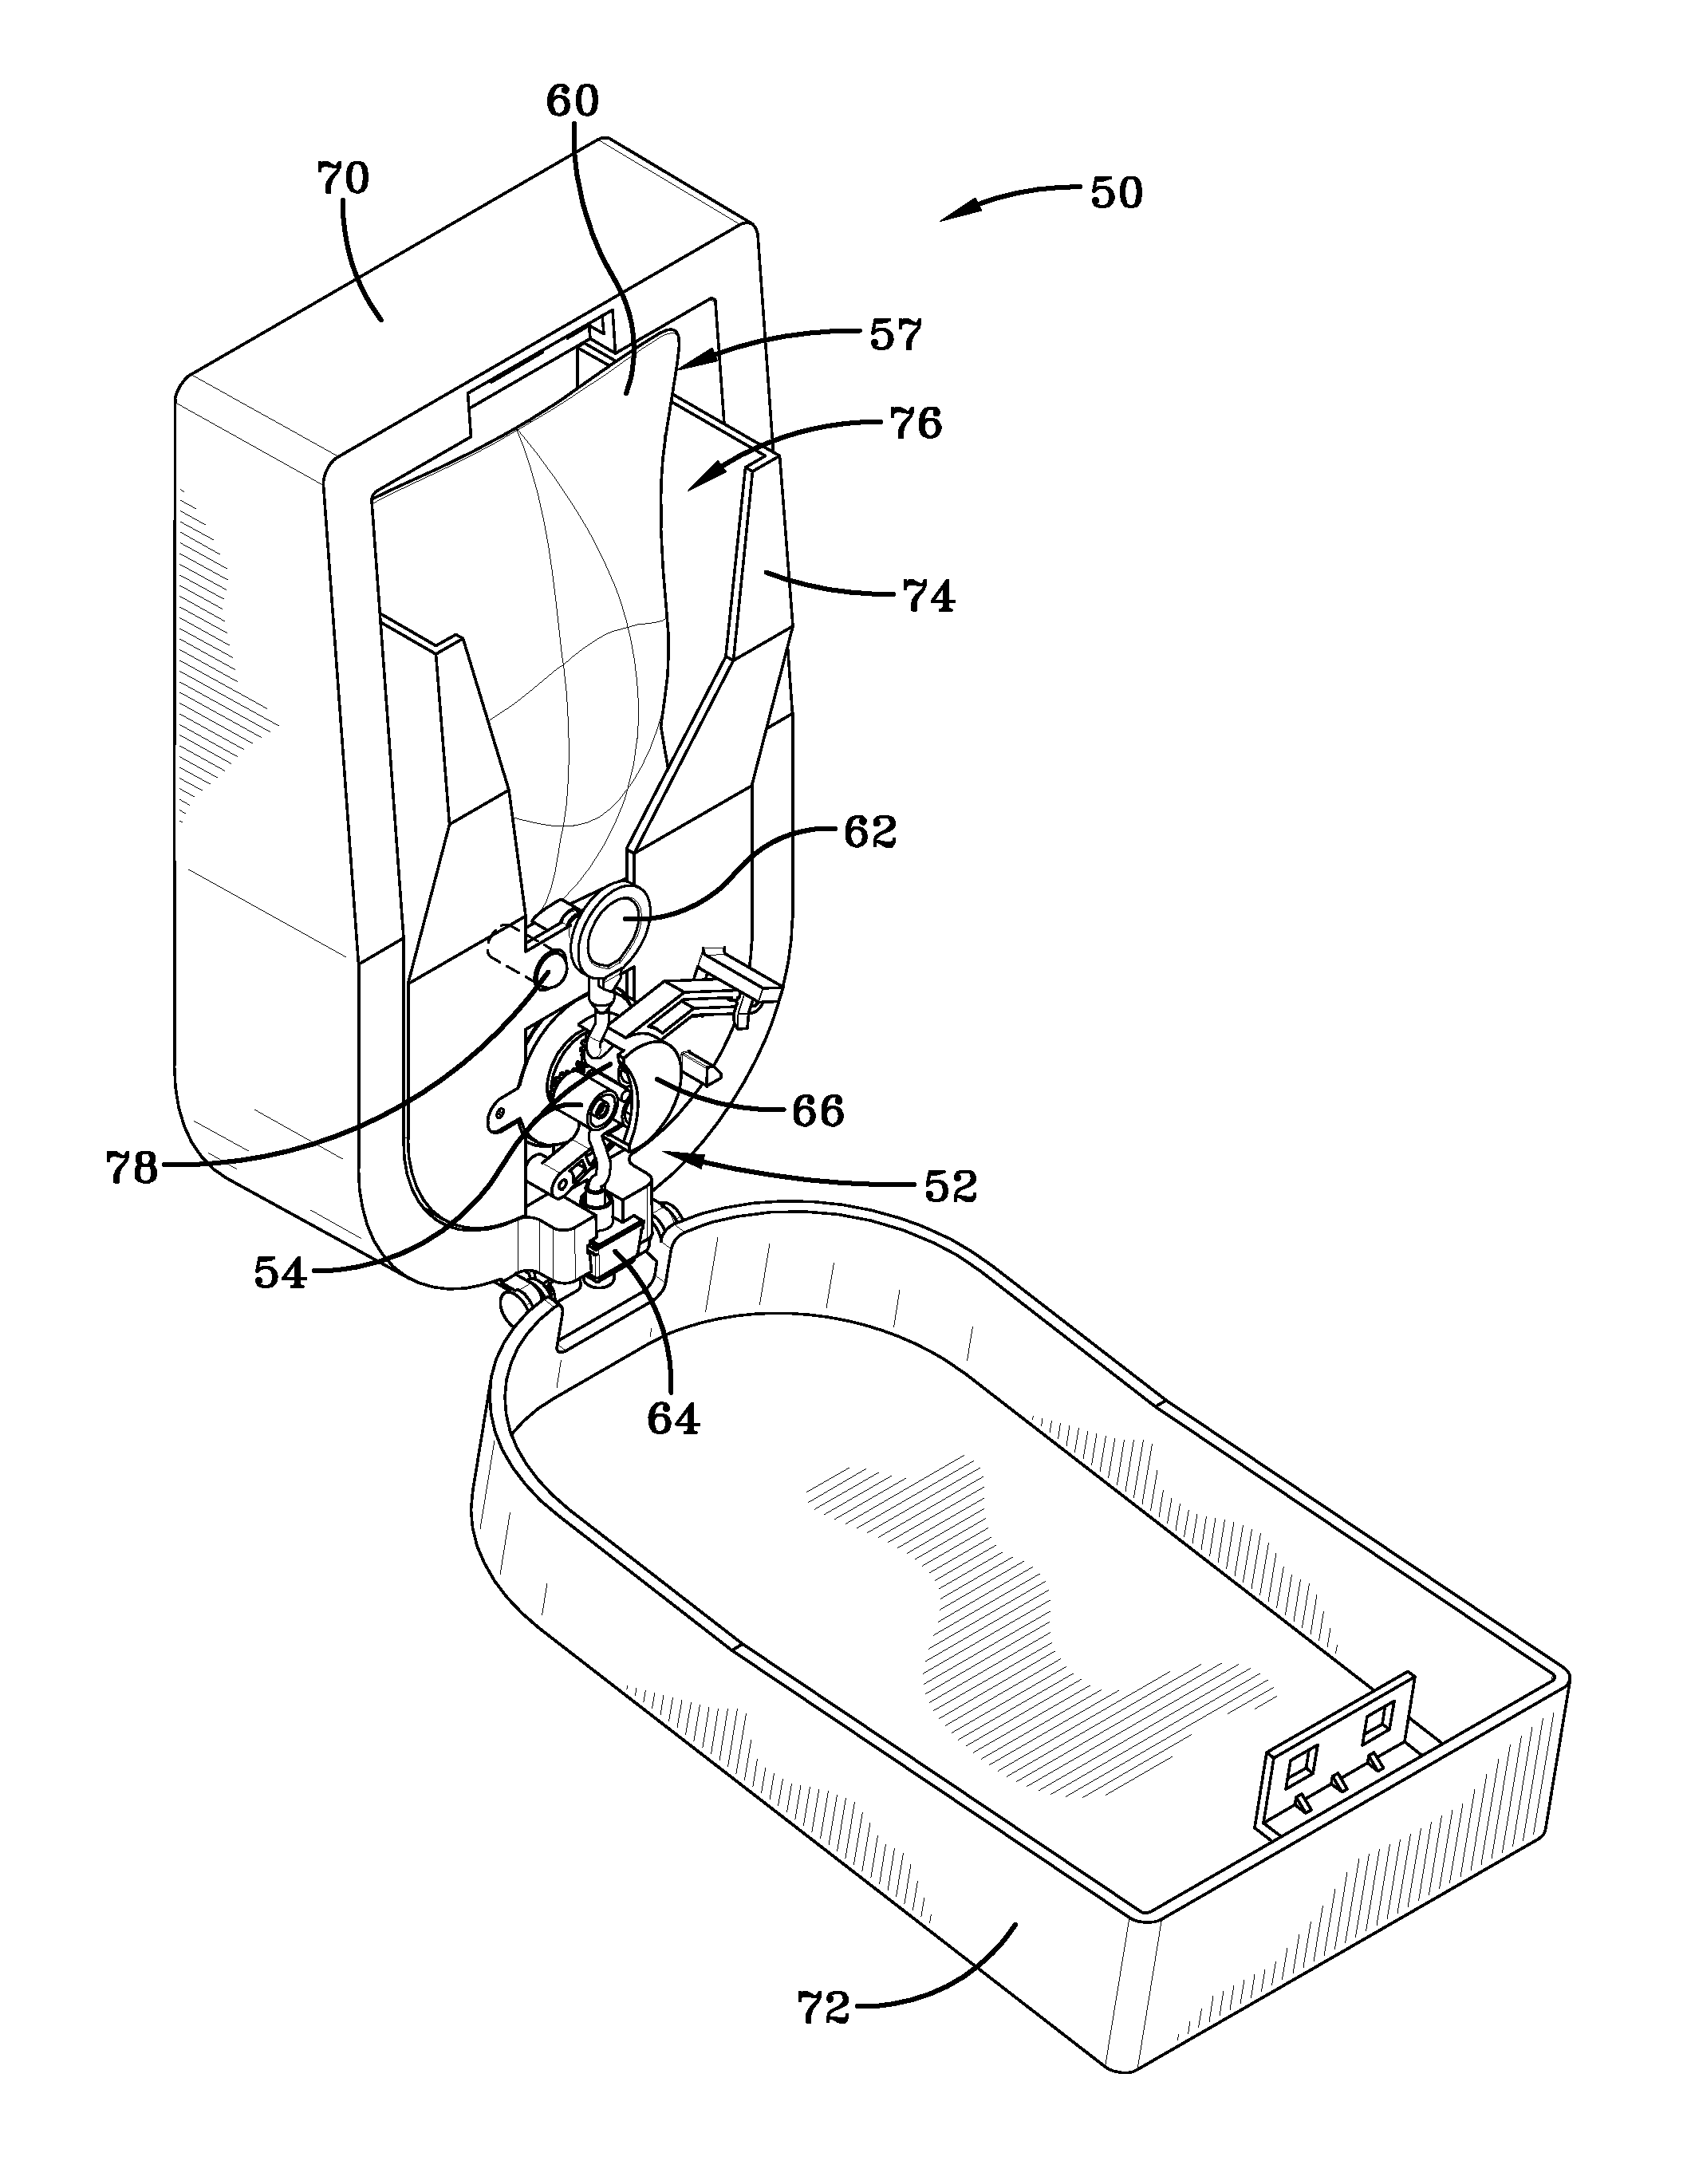 Taggant keying system for dispensing systems